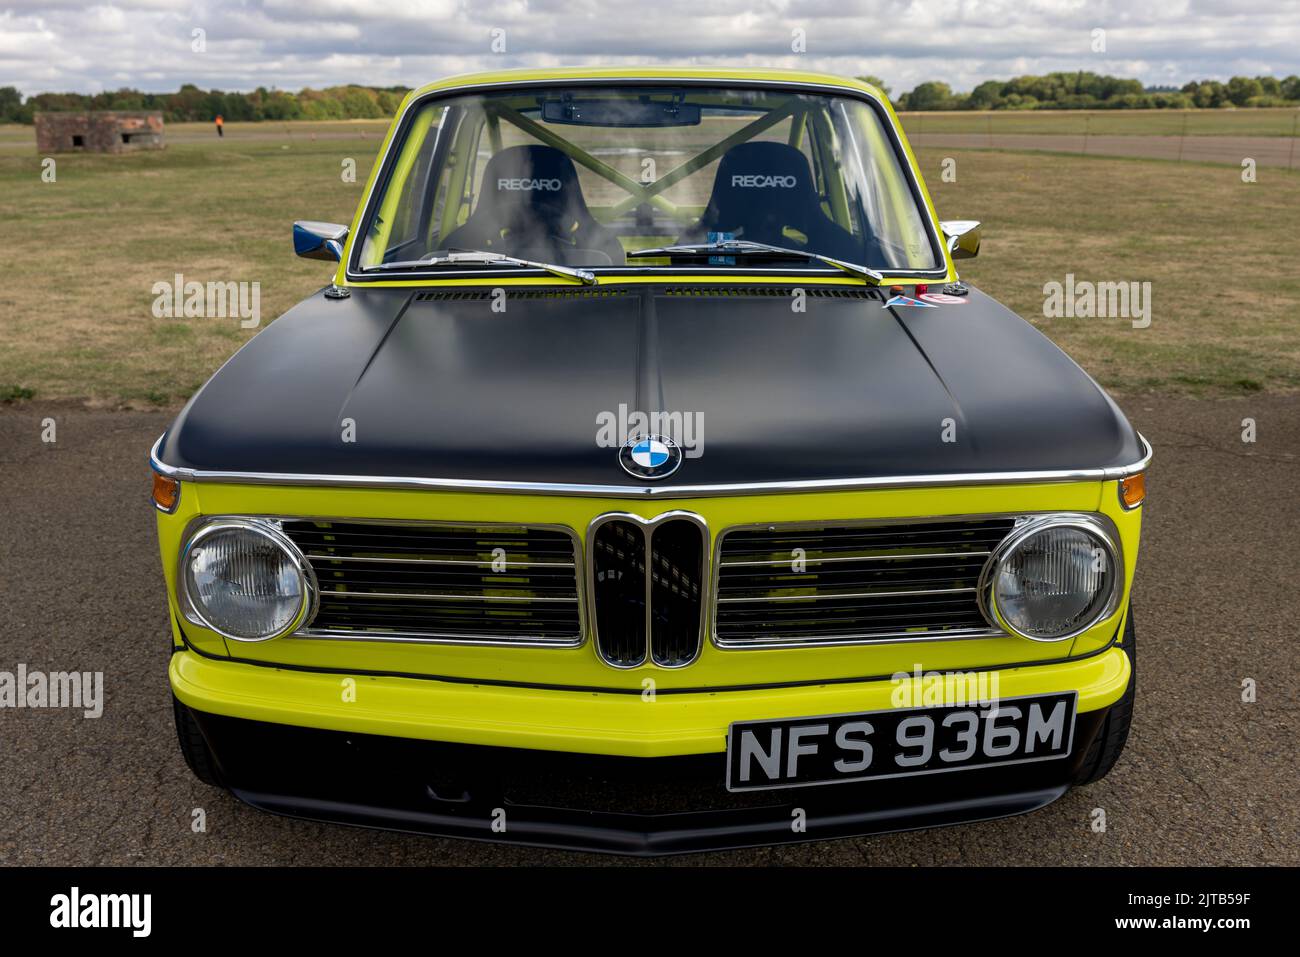 1973 BMW 2002 ‘NFS 936M’ on display at the Bicester Heritage Scramble celebrating 50 years of BMW M Stock Photo